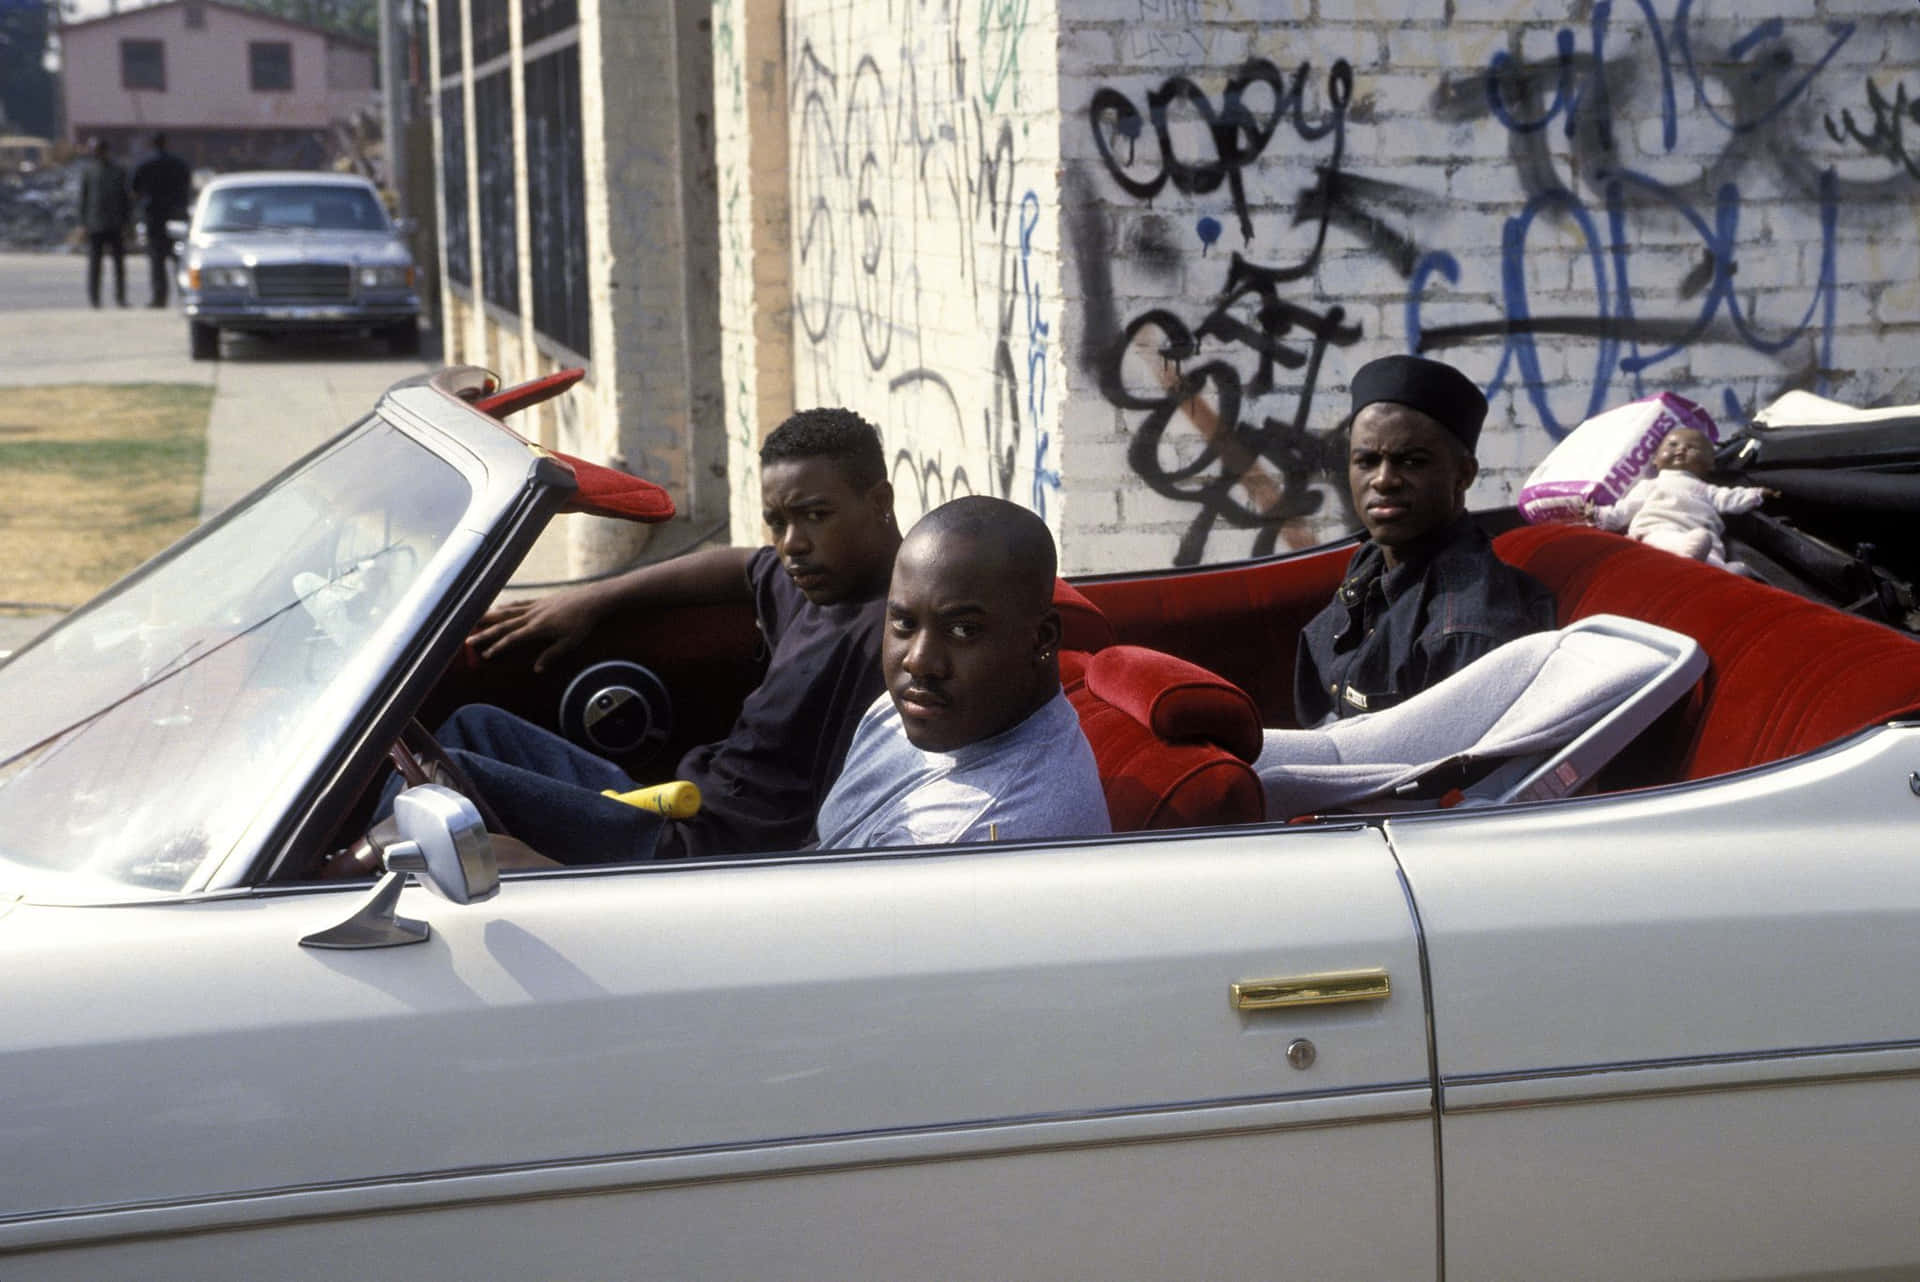 Follow the lives of three young men in devastated inner city Watts, Los Angeles Wallpaper